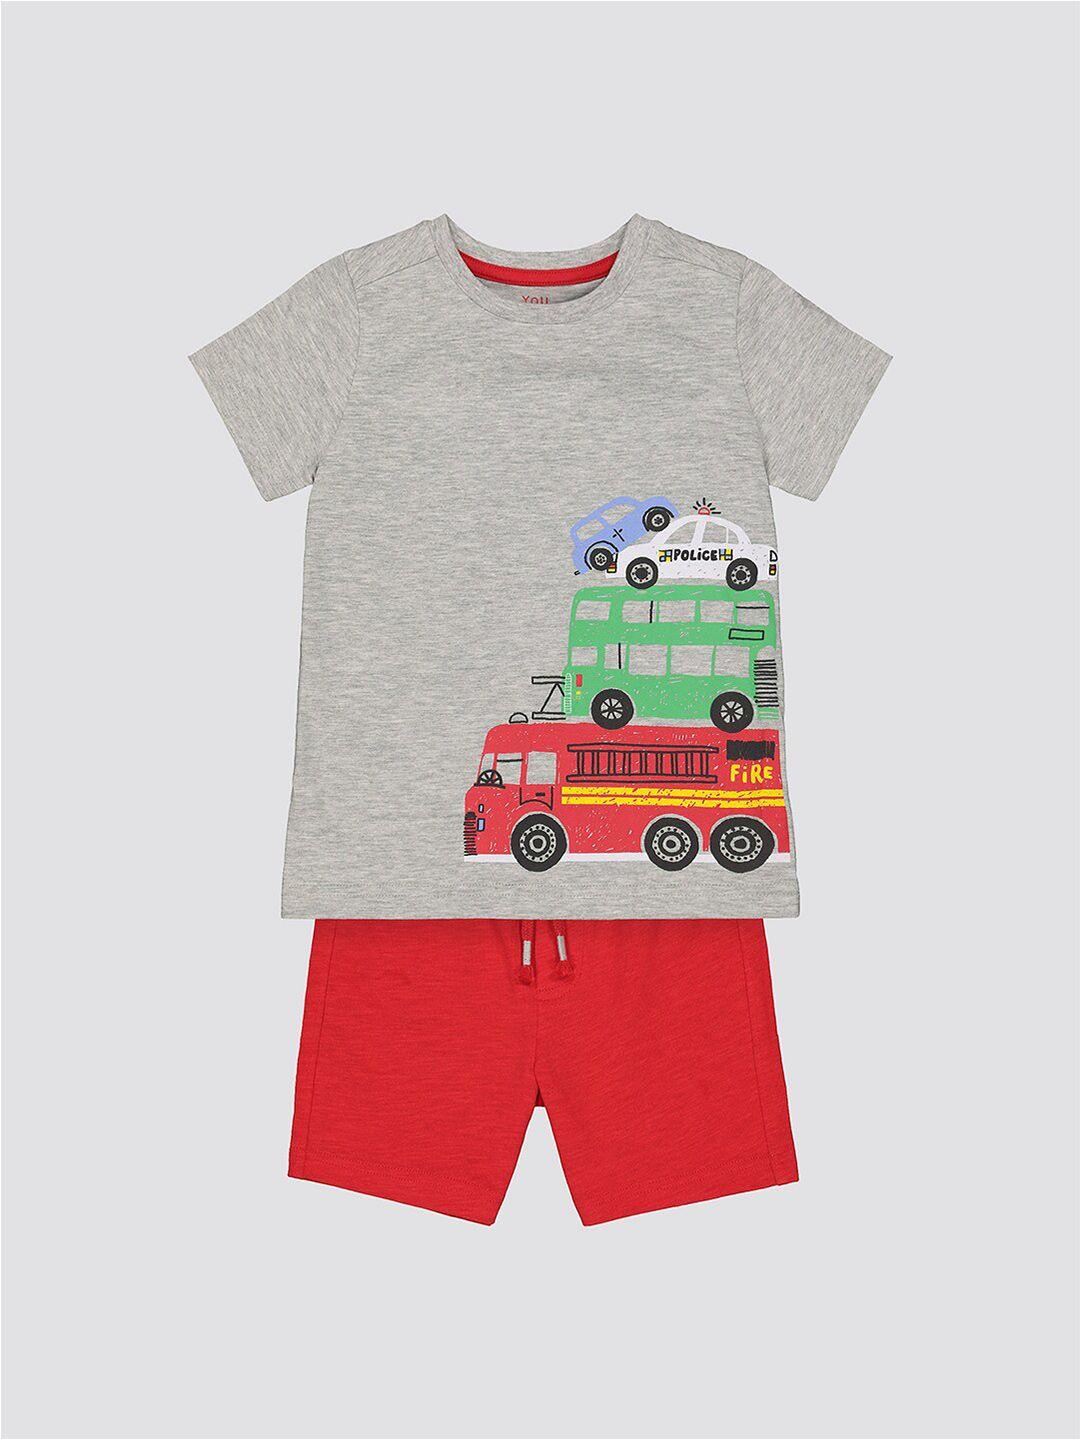 mothercare-boys-red-printed-clothing-set